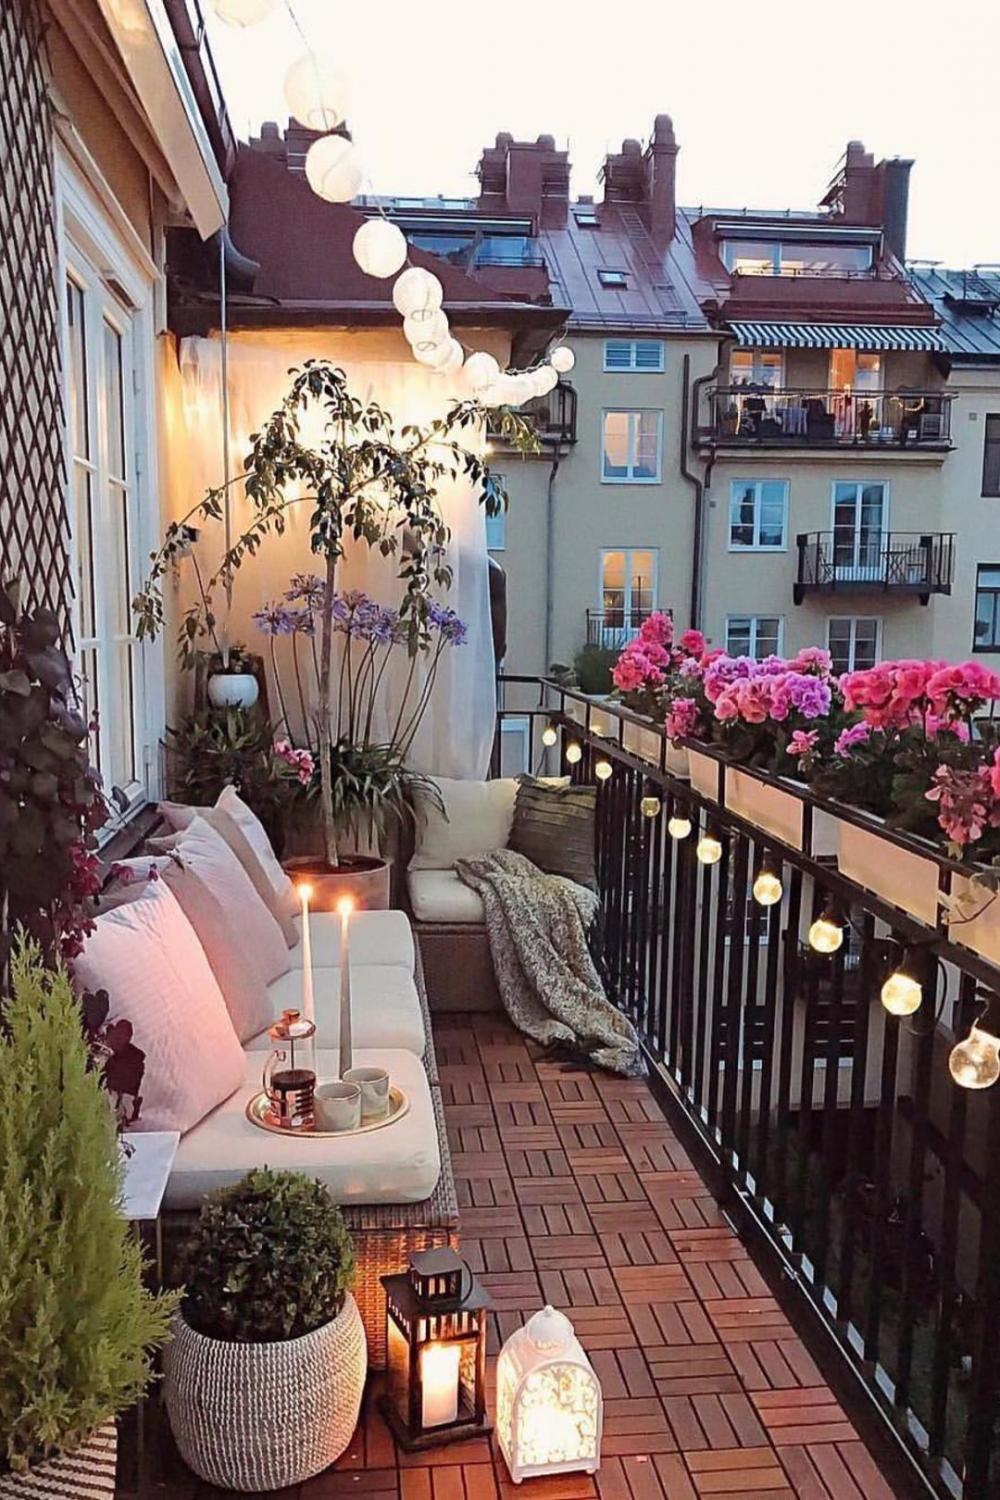 15 ideas on how to best design your balcony for every occasion. Ideas and tips for choosing furniture and accessories